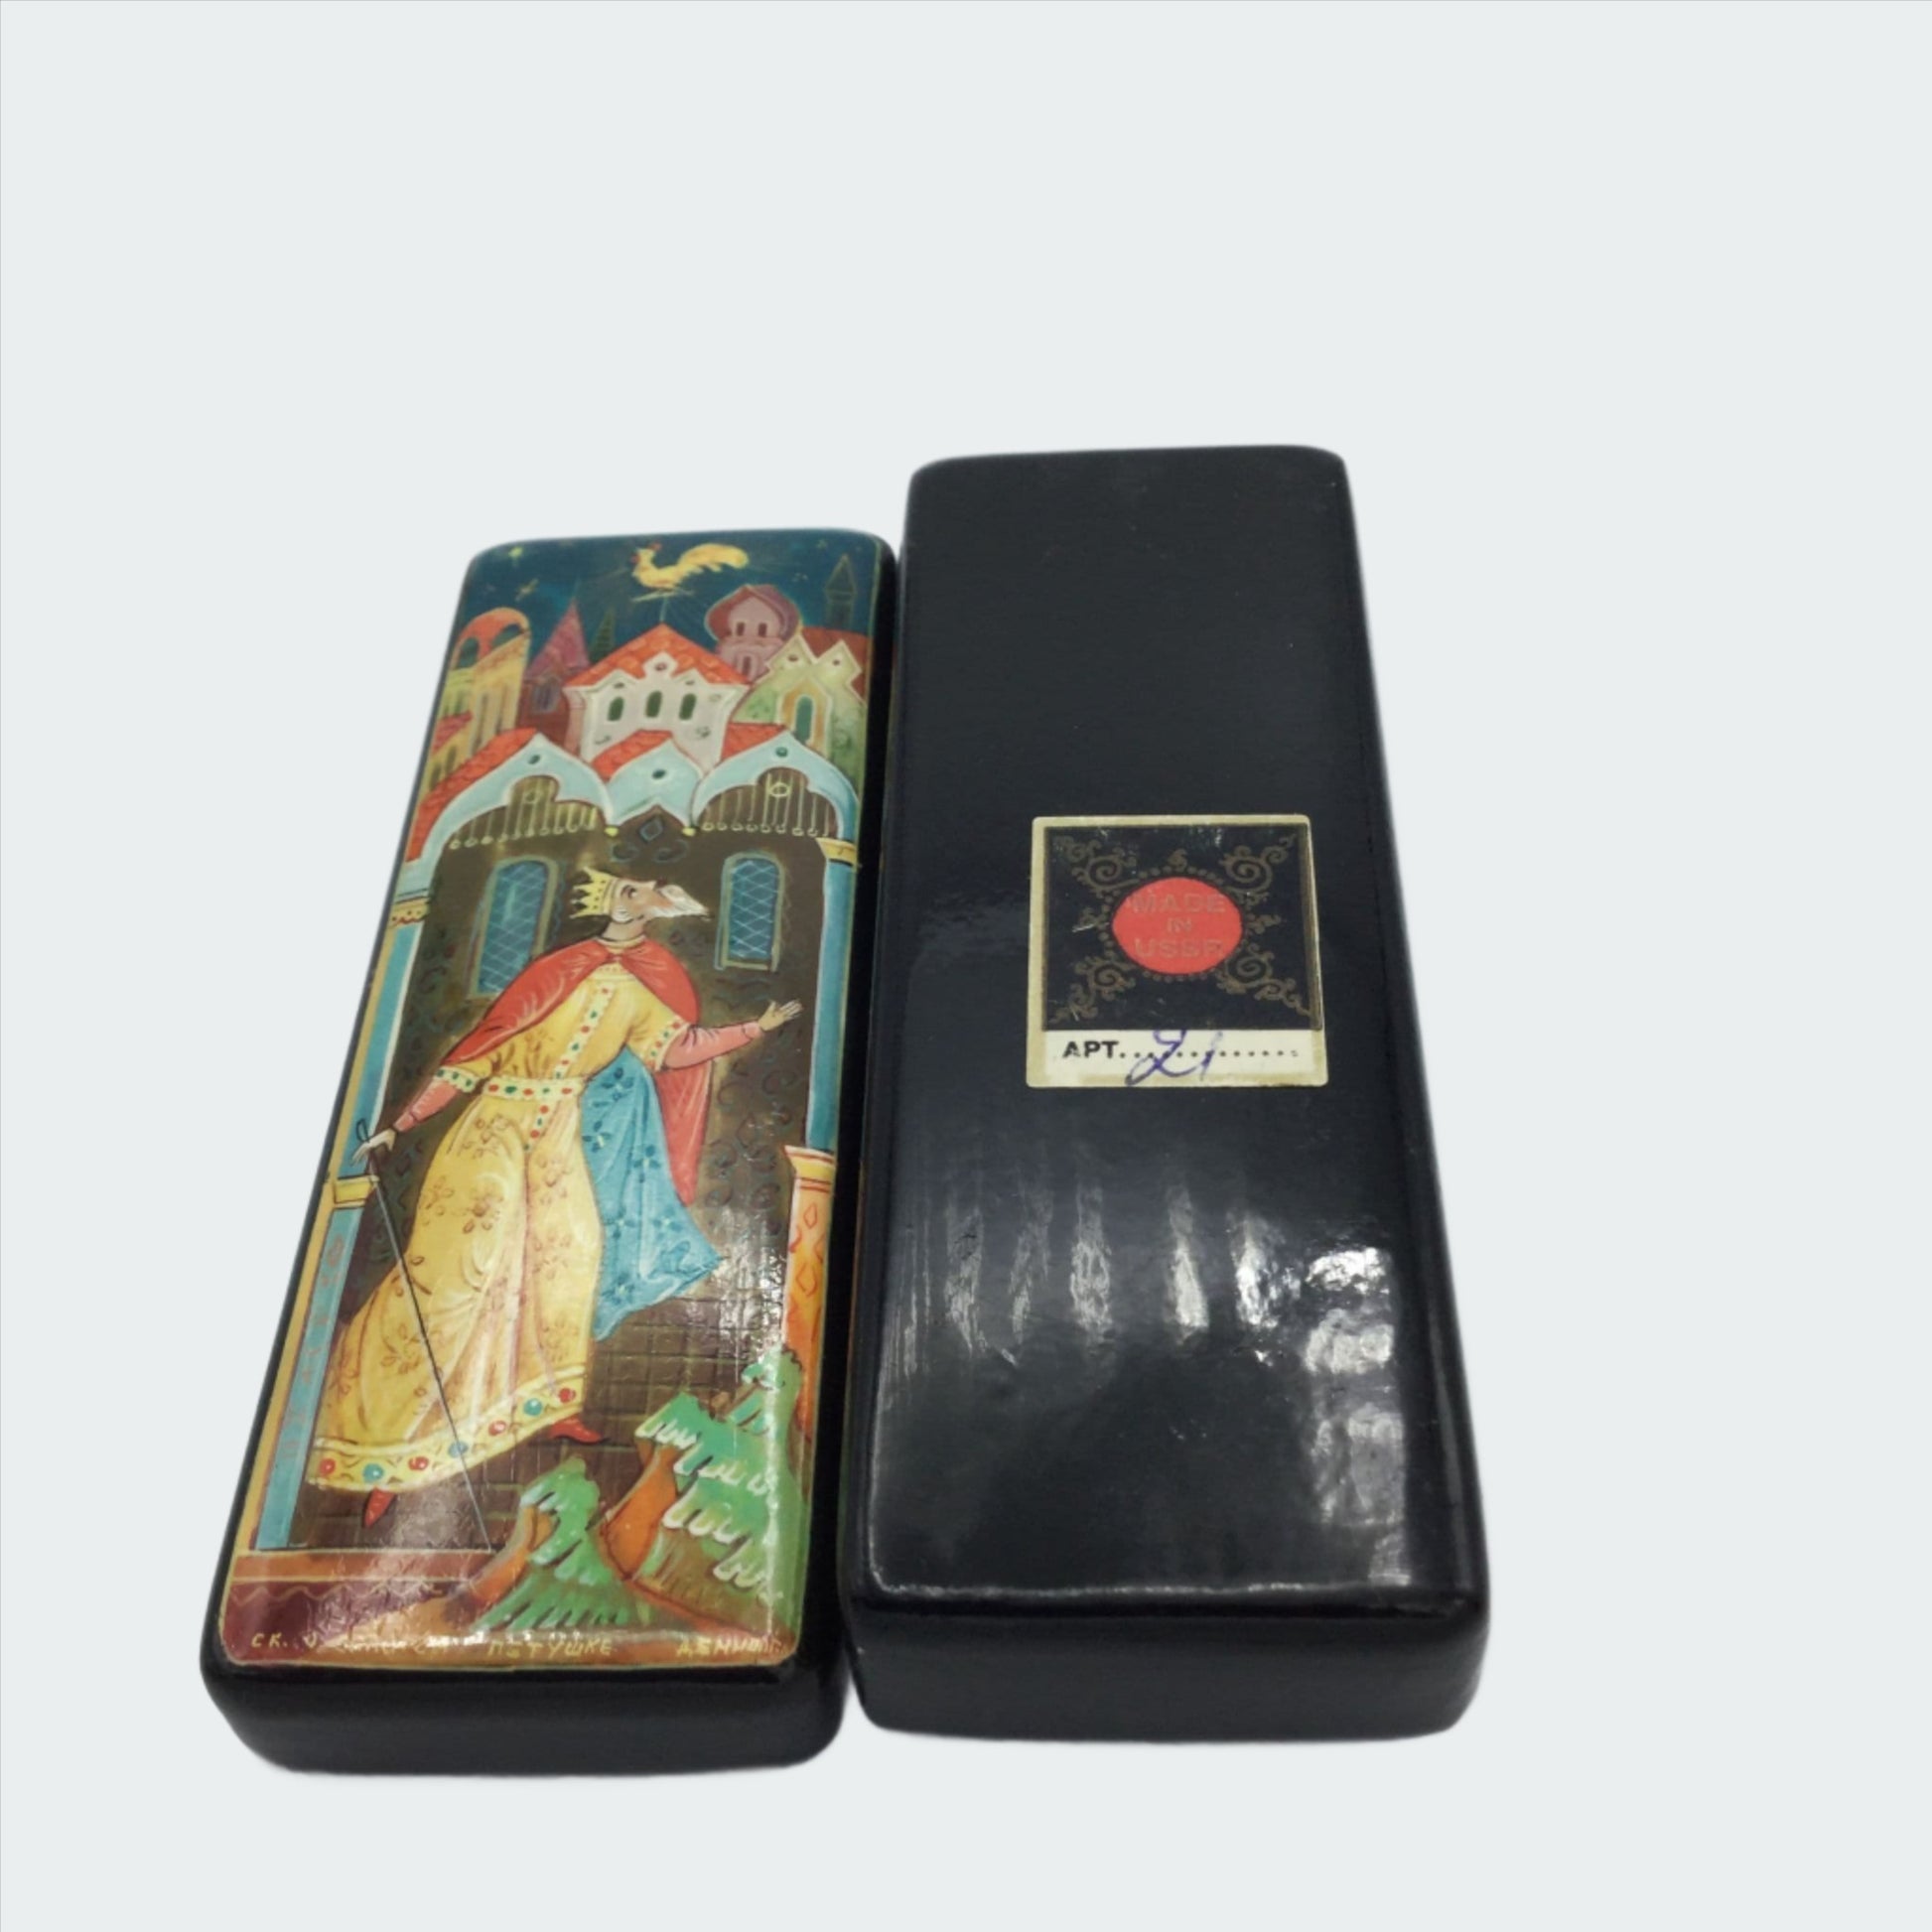 Black handpainted box with a colourful painting of a king looking at a cockerel above him and the base with the Apt 21 sticker on it